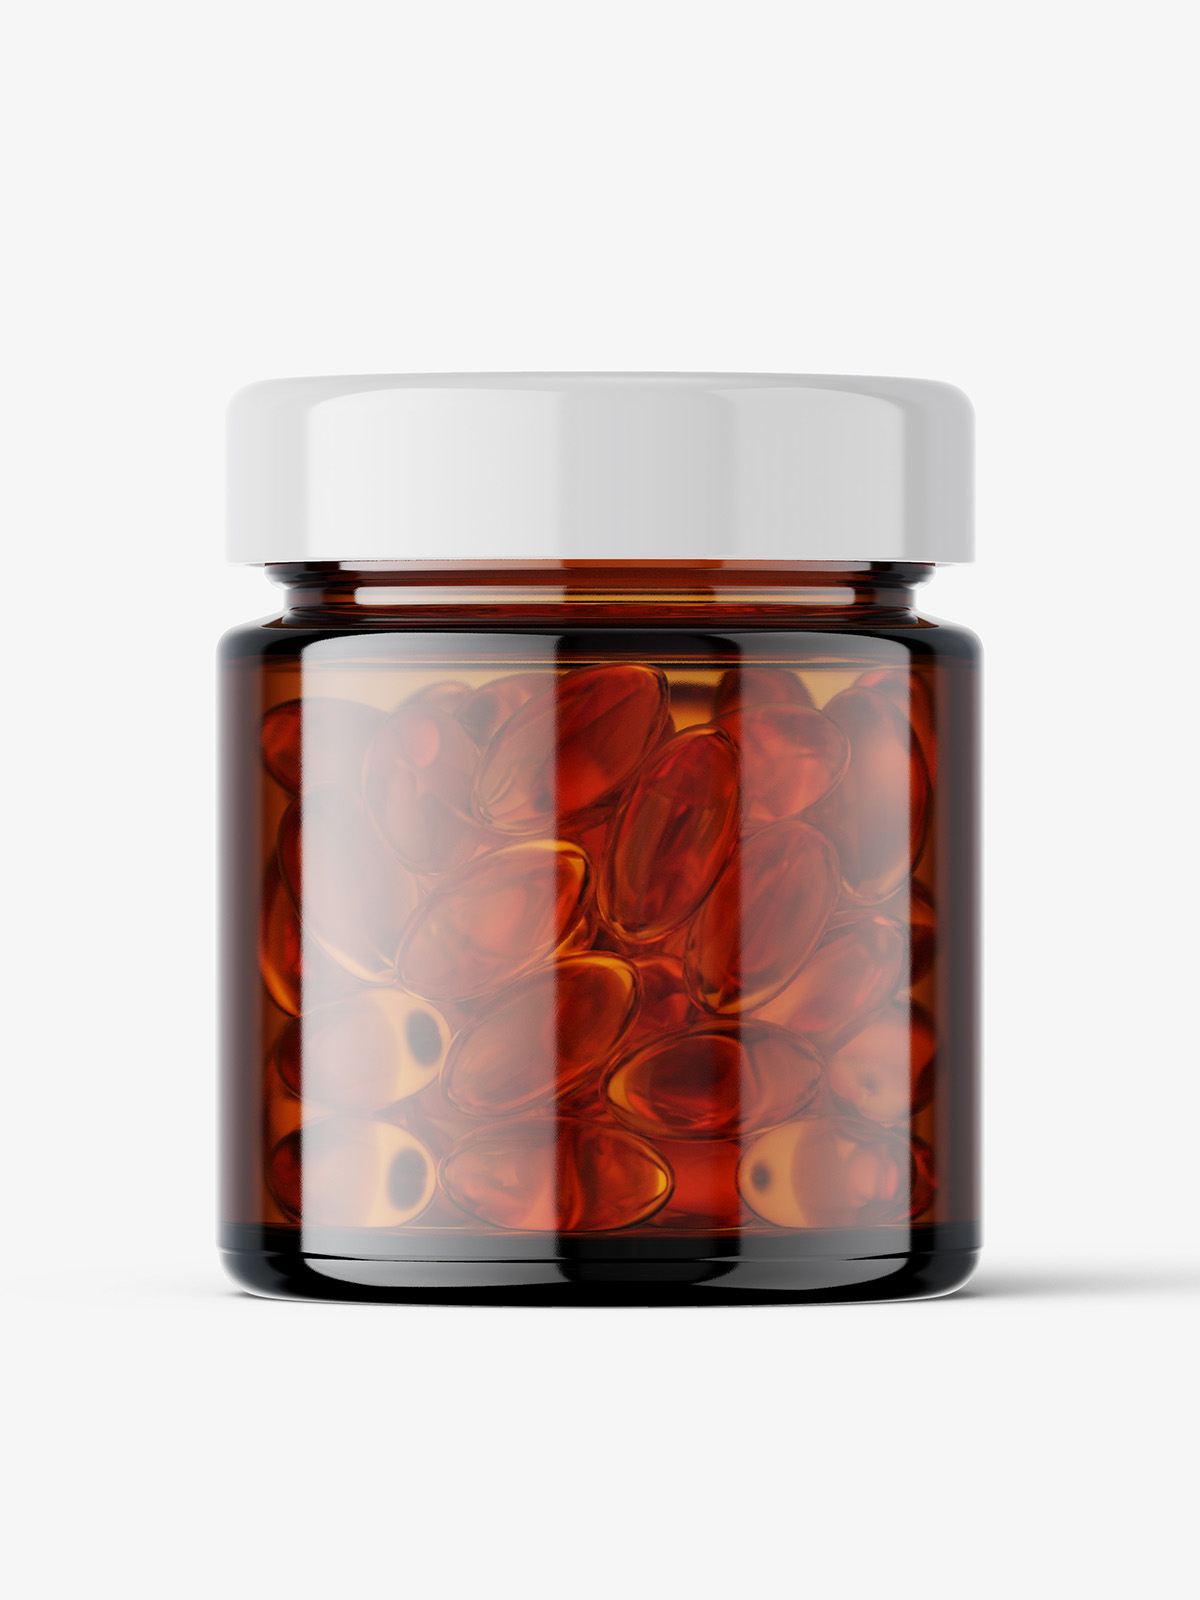 Download Glass Jar With Fish Oil Capsules Mockup Amber Smarty Mockups